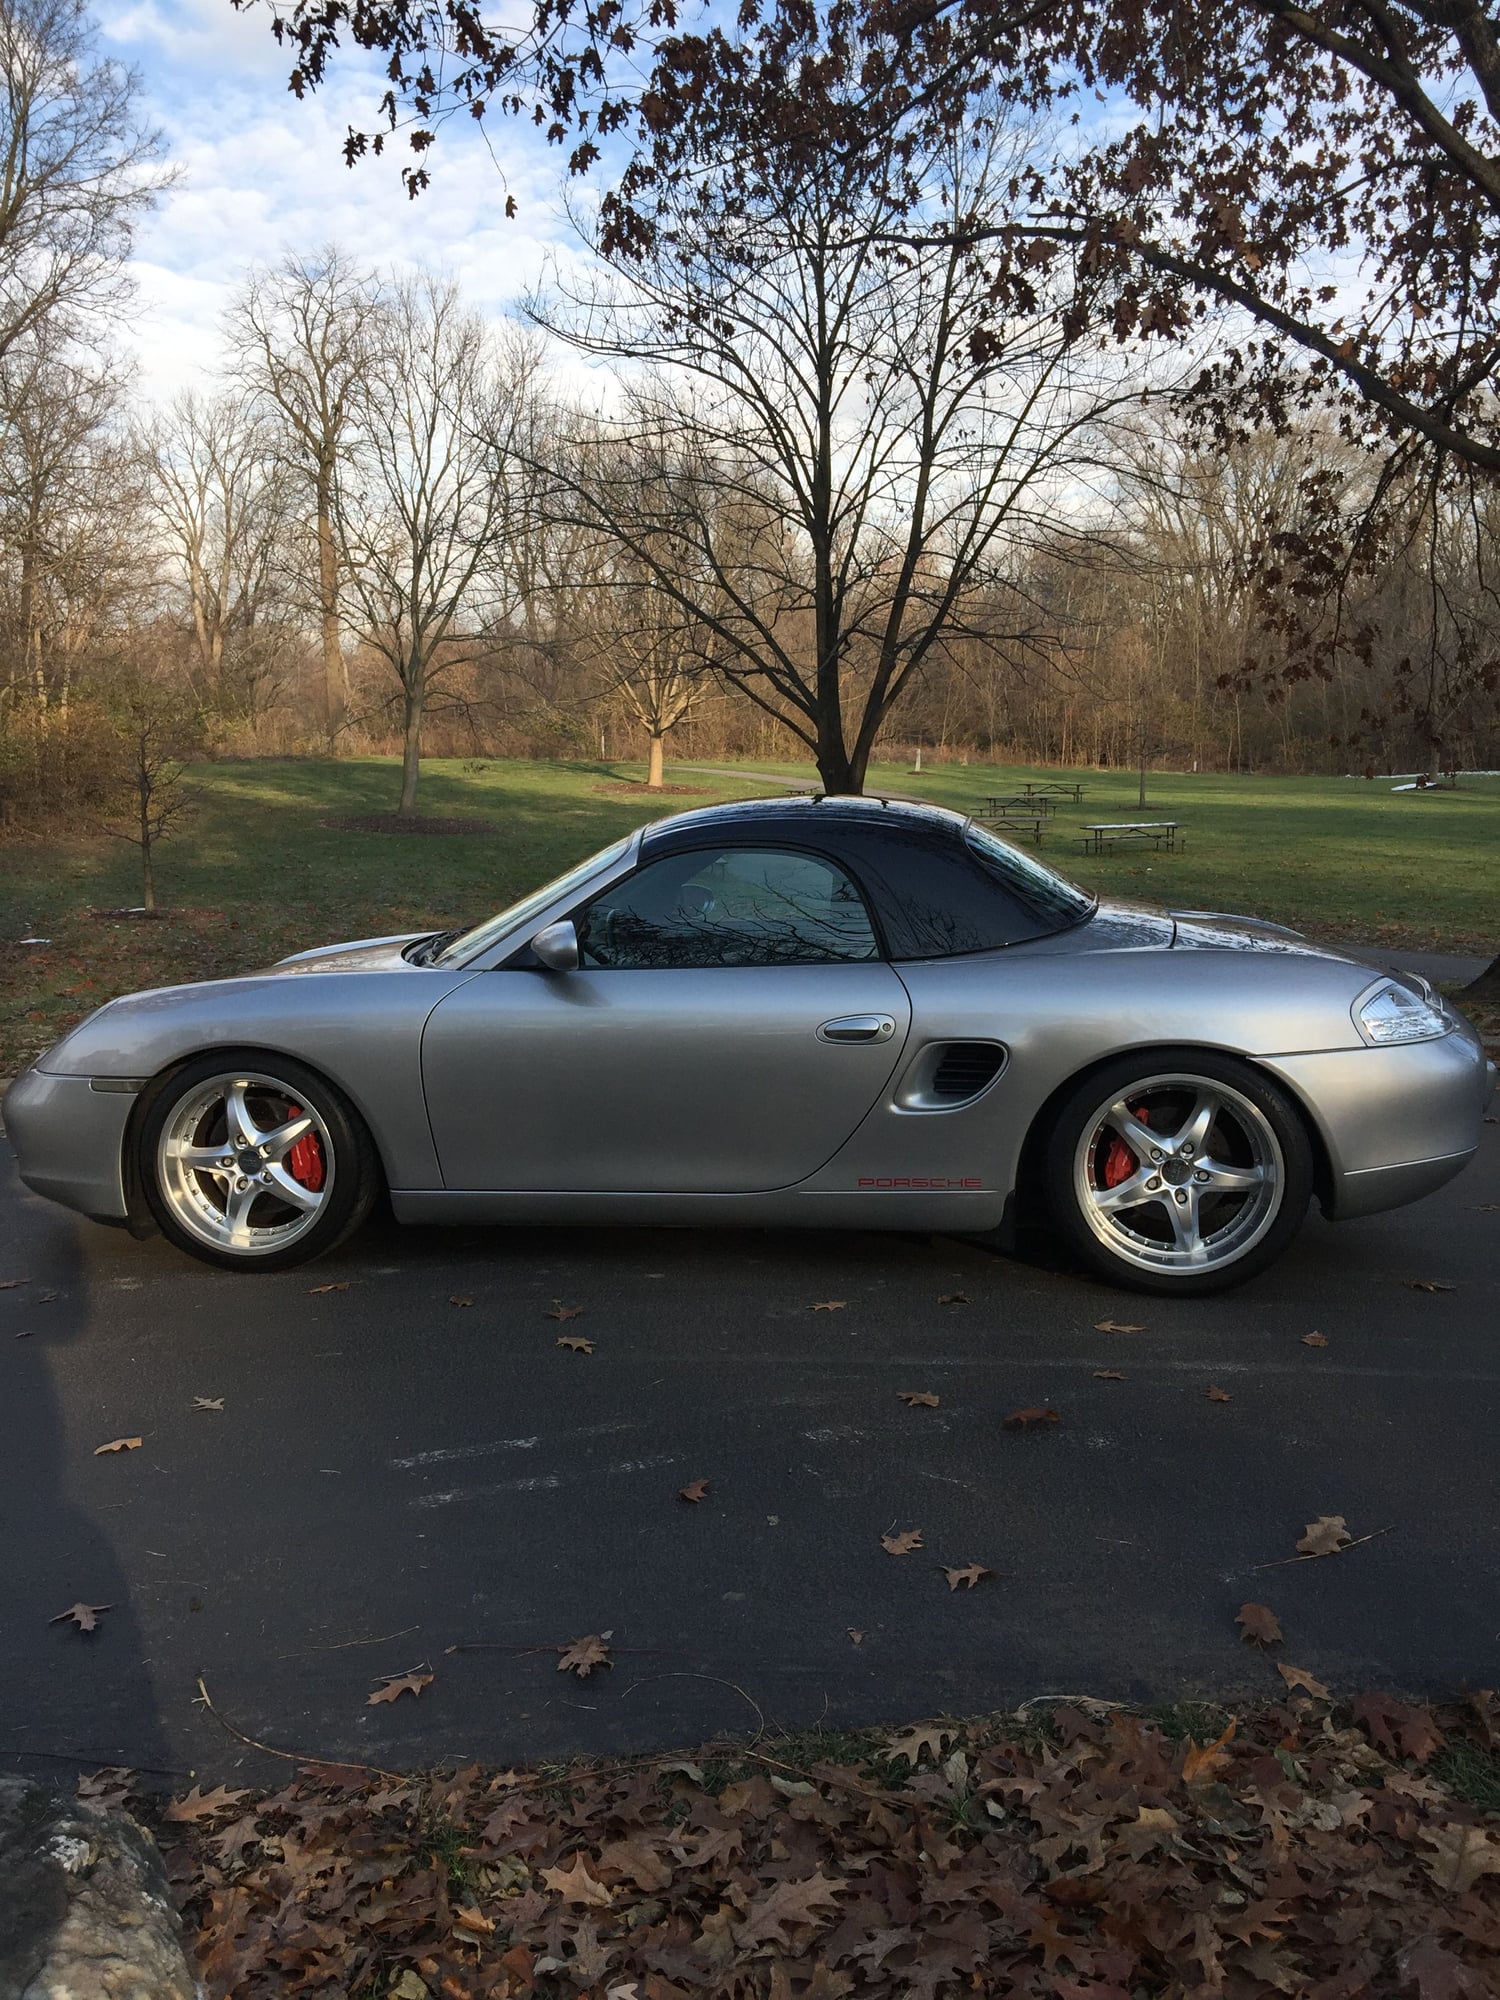 1999 Porsche Boxster - Ultimate sleeper (300hp Boxster 986) - Used - VIN WP0CA298XXU624163 - 79,400 Miles - 6 cyl - 2WD - Manual - Convertible - Silver - Naperville, IL 60564, United States